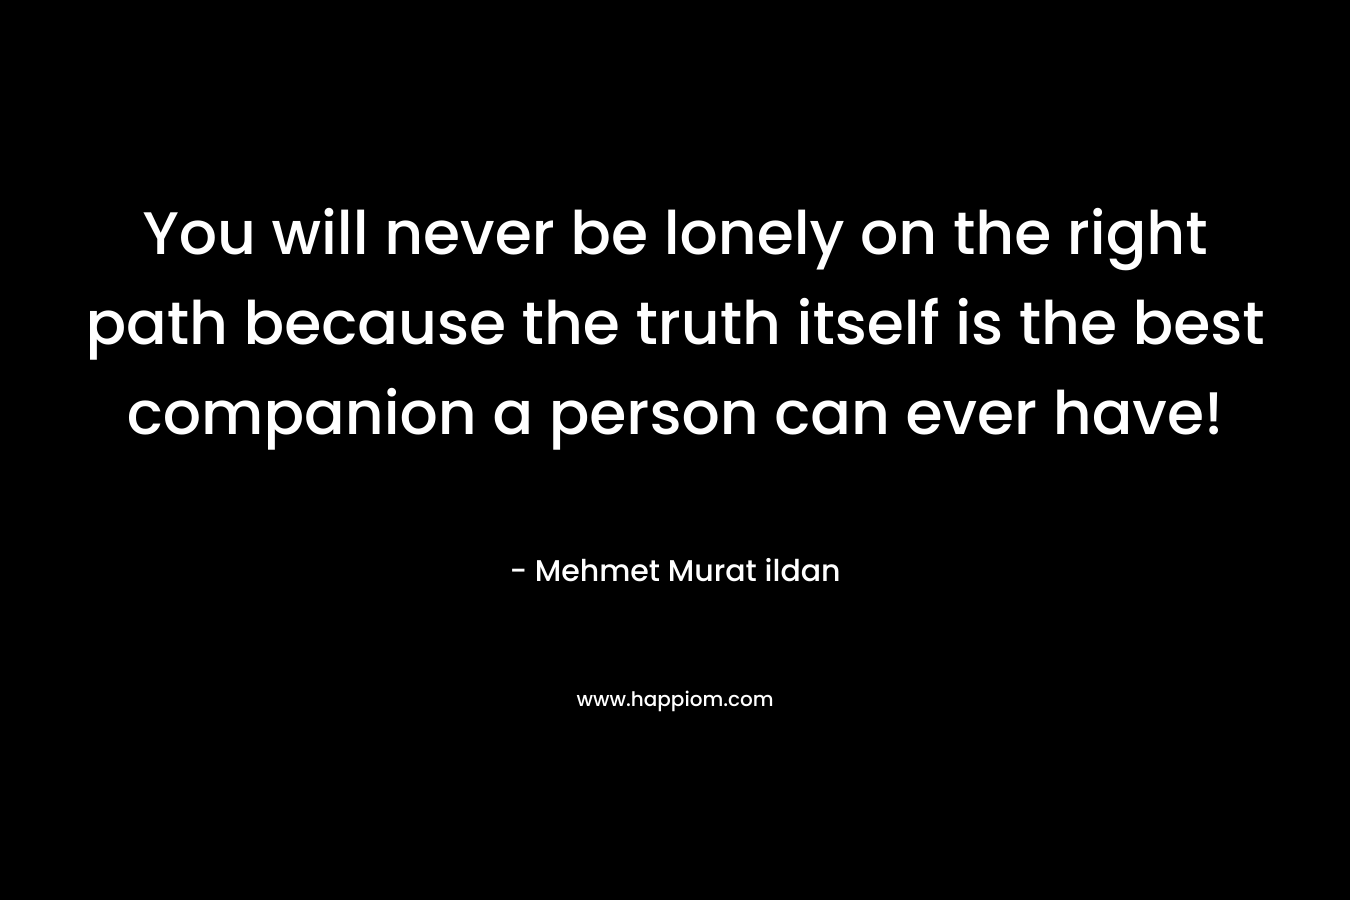 You will never be lonely on the right path because the truth itself is the best companion a person can ever have! – Mehmet Murat ildan